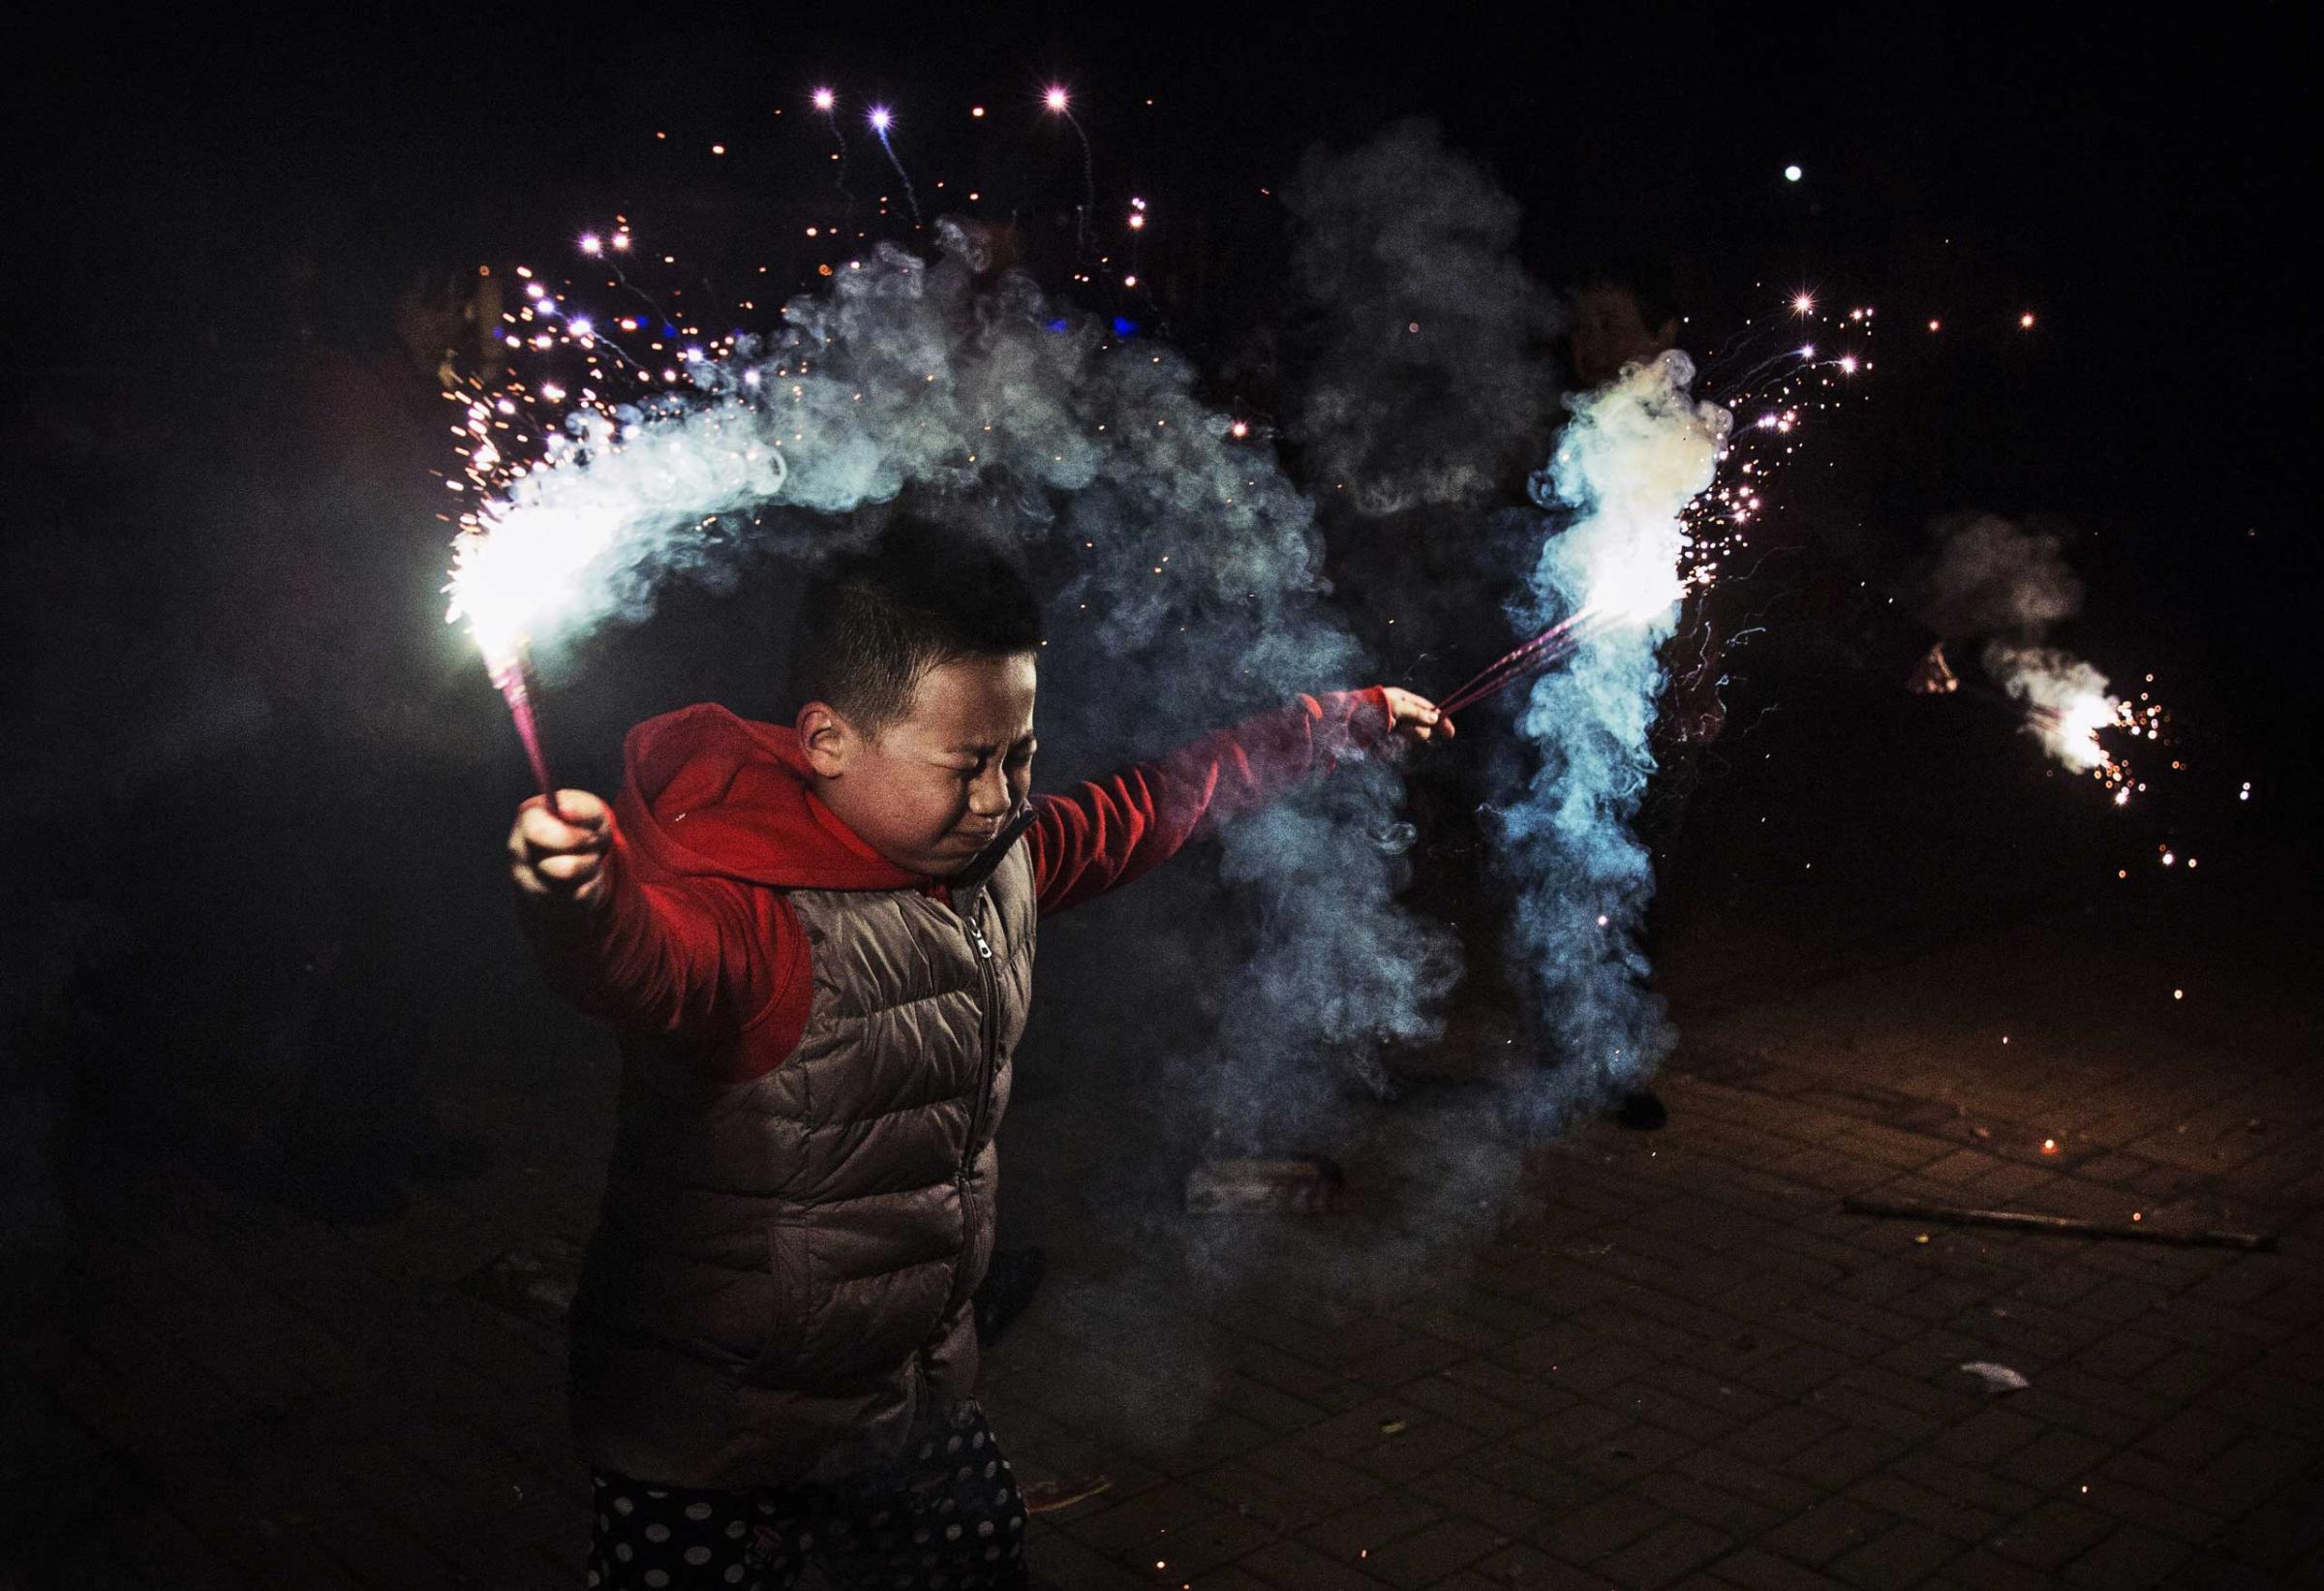 A Chinese boy uses sparklers during celebrations of the Lunar New early on Feb. 19, 2015 in Beijing.